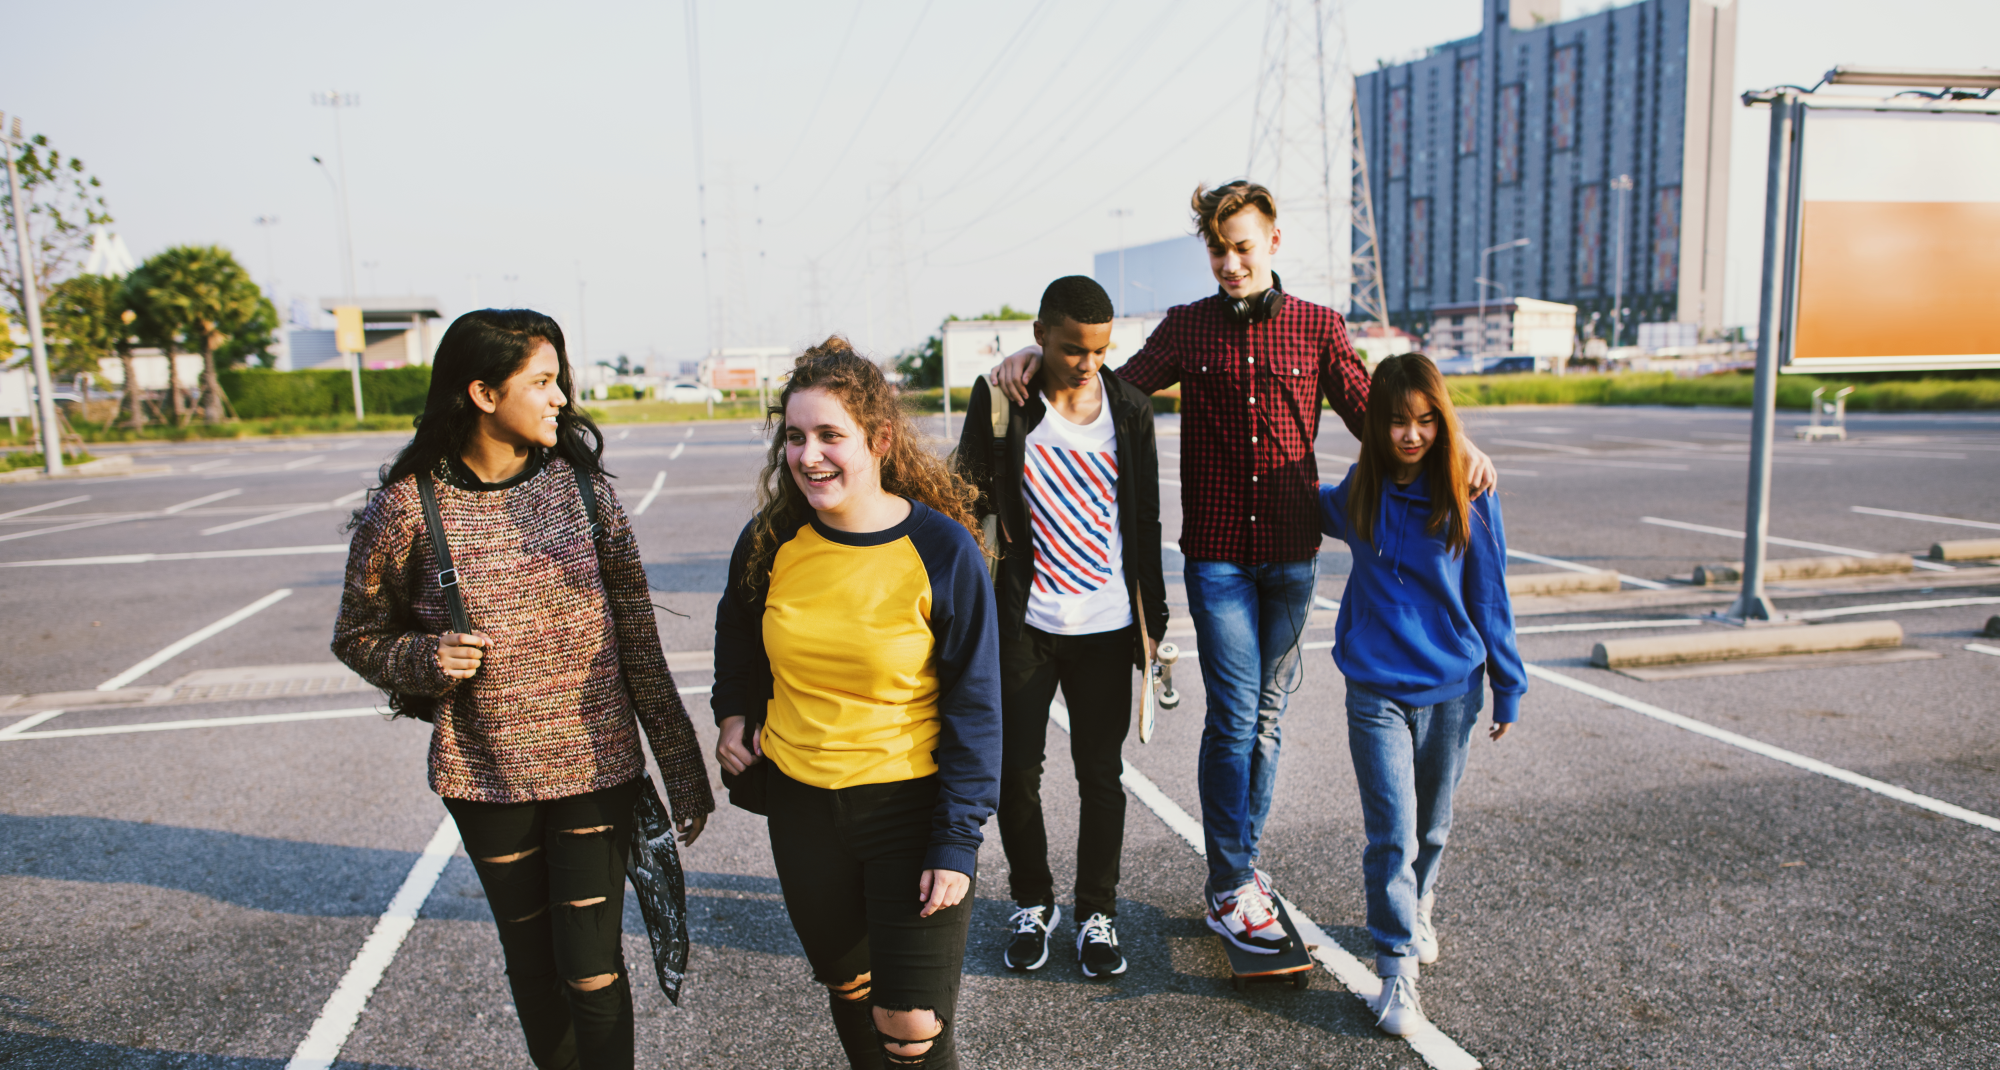 a group of mixed gender teenagers are walking across an outdoor car park and smiling at each other